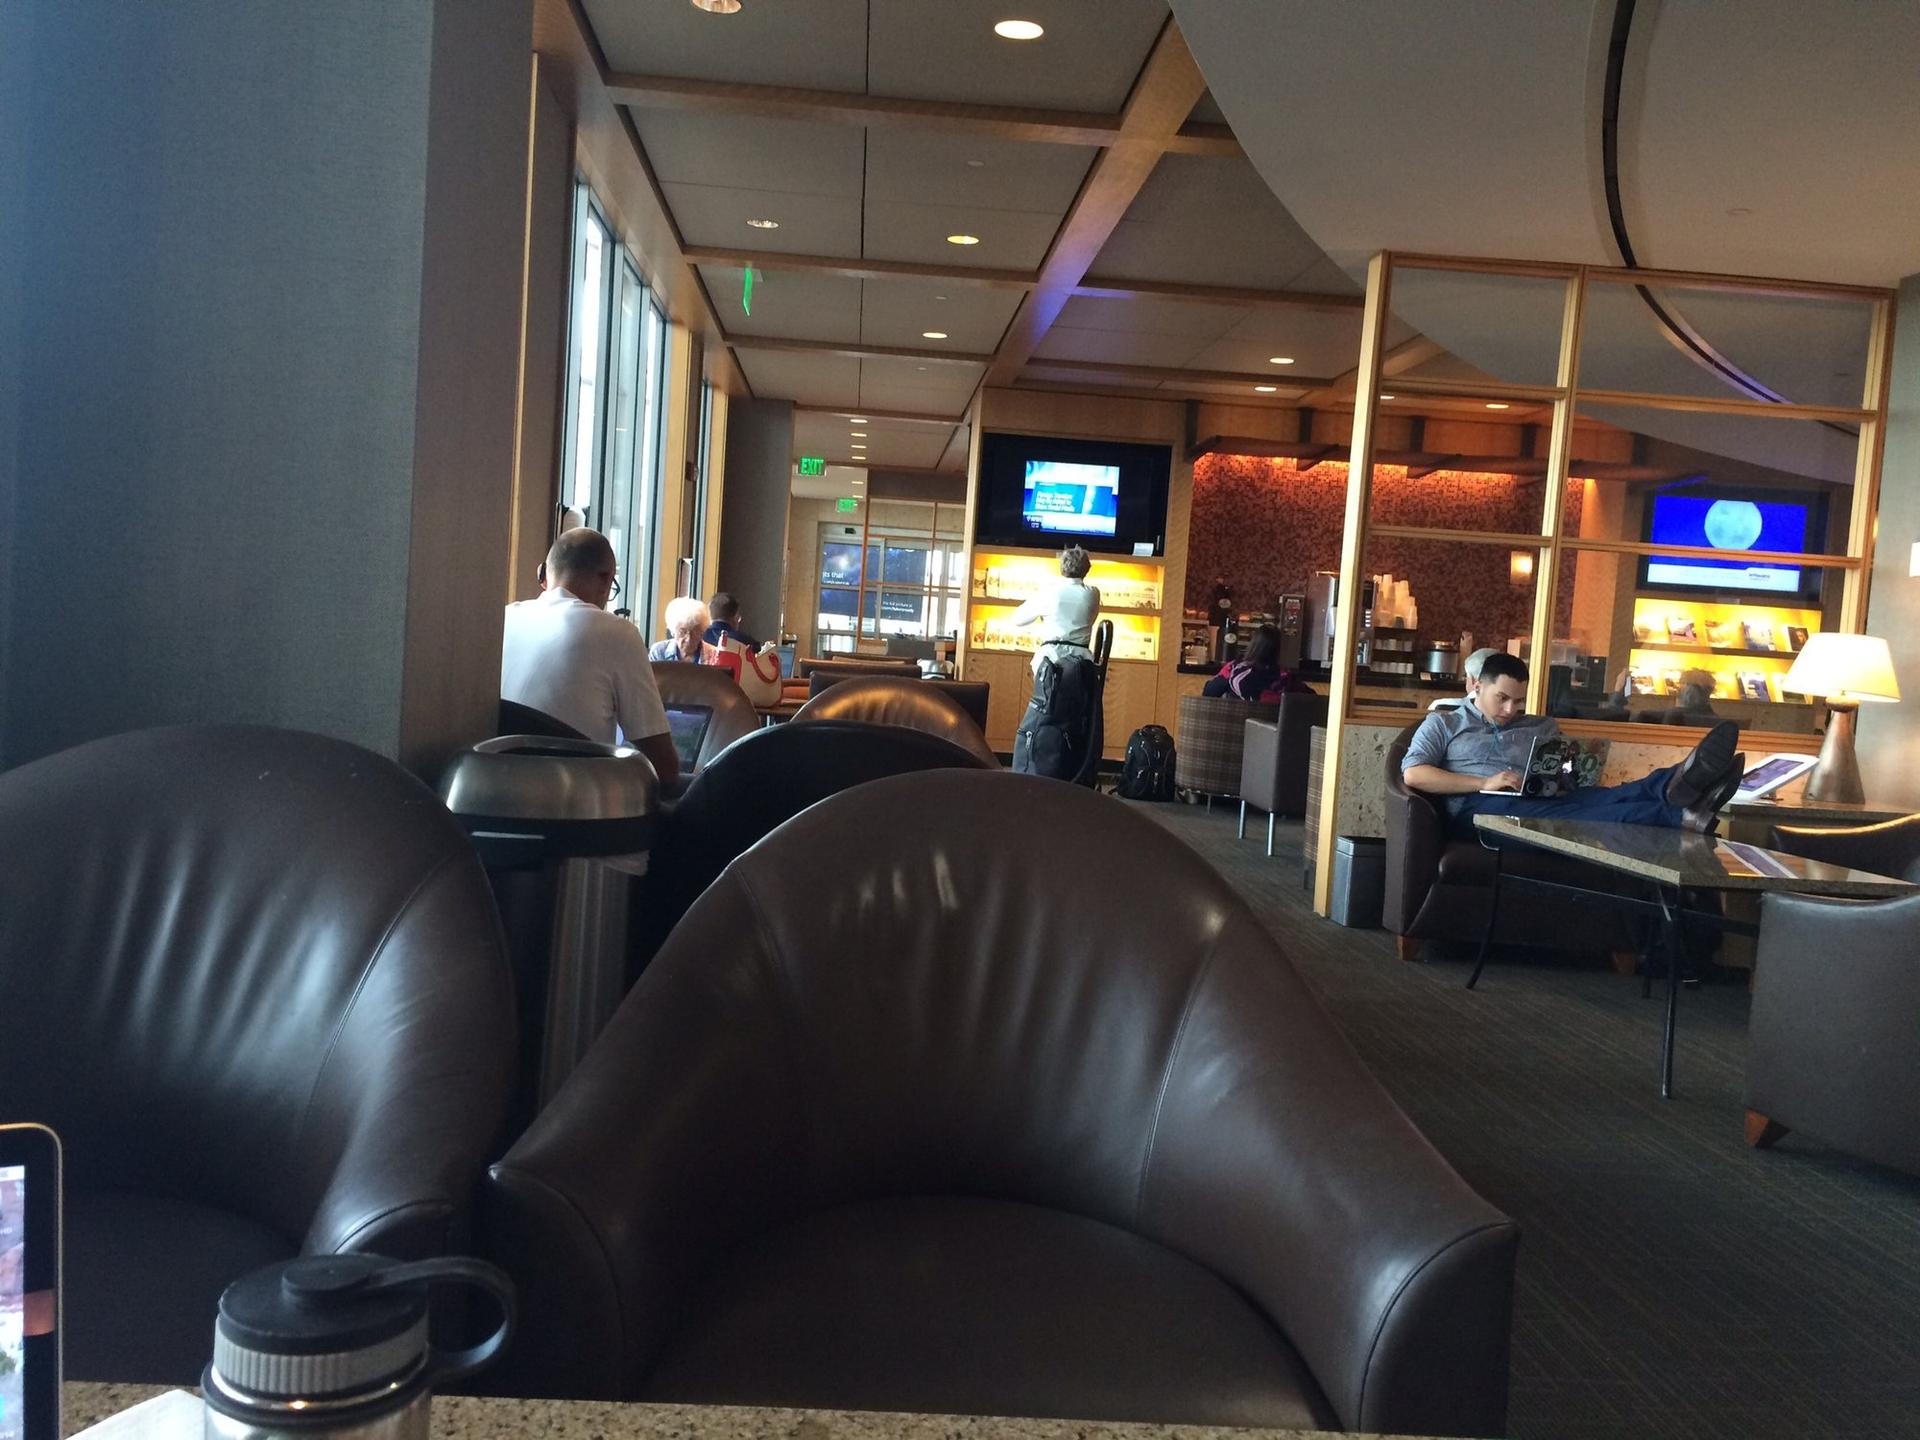 American Airlines Admirals Club image 4 of 14